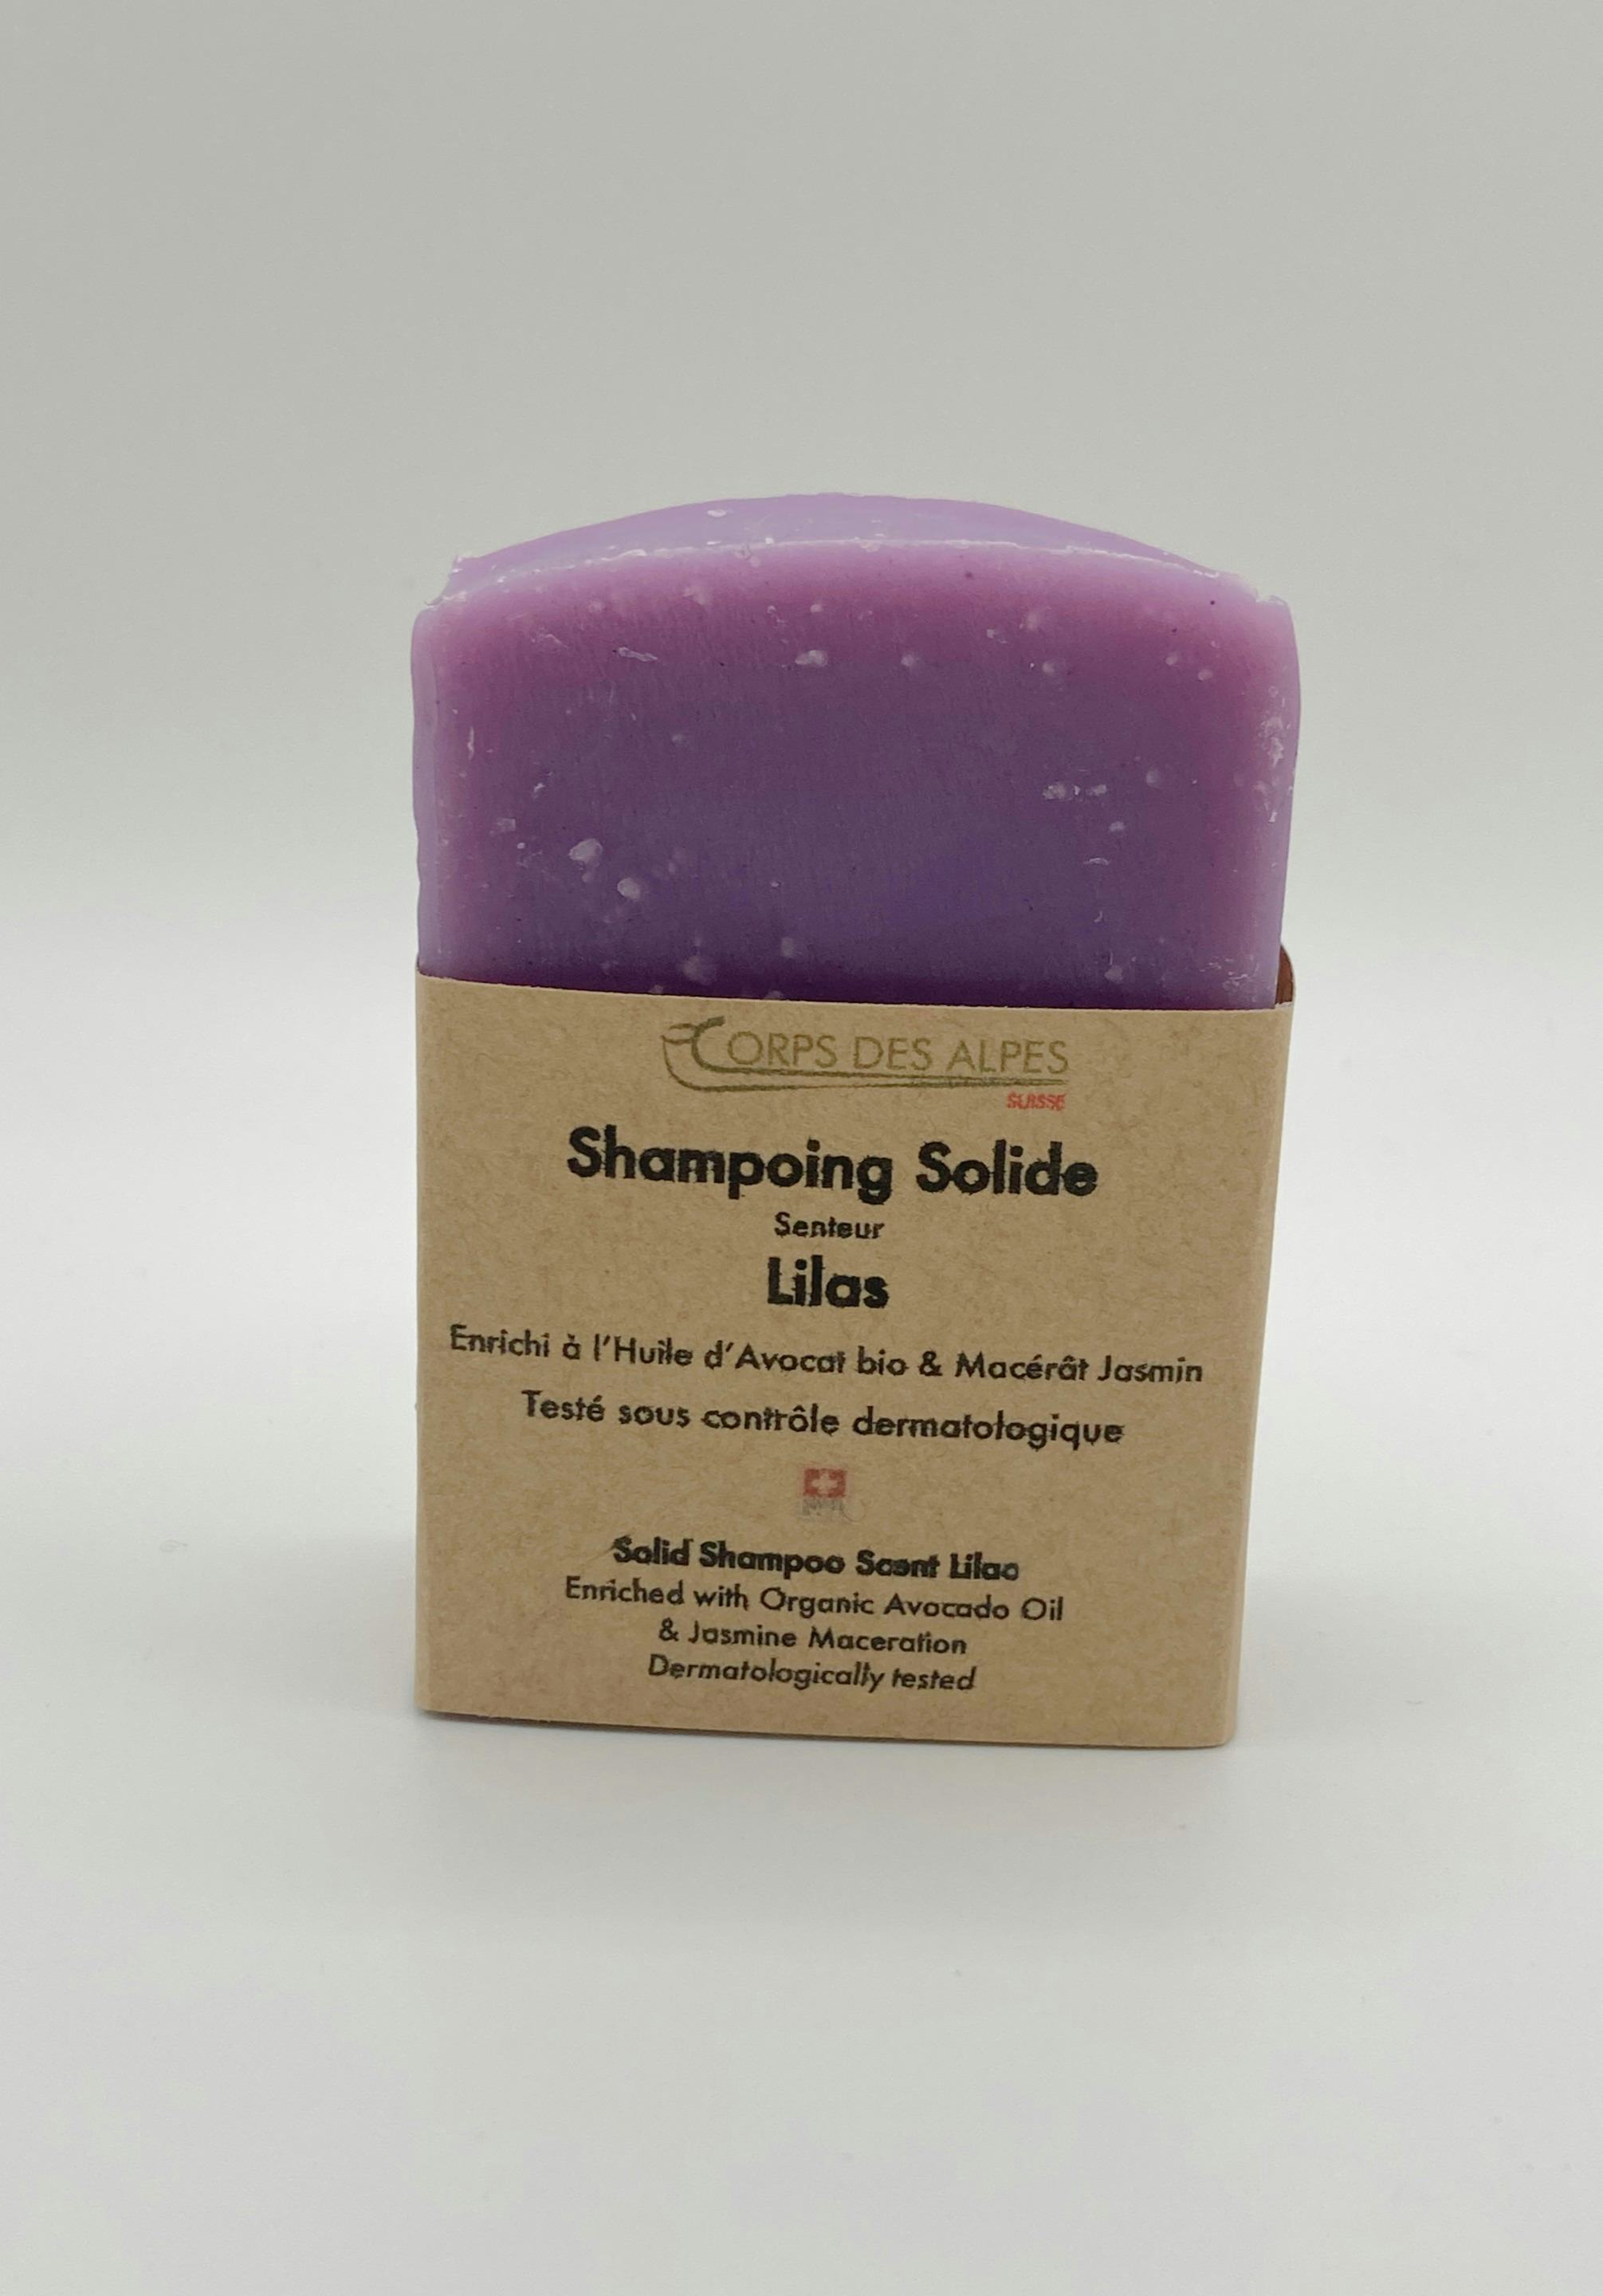 Lilac scent solid shampoo, artisanal product for direct sale in Switzerland